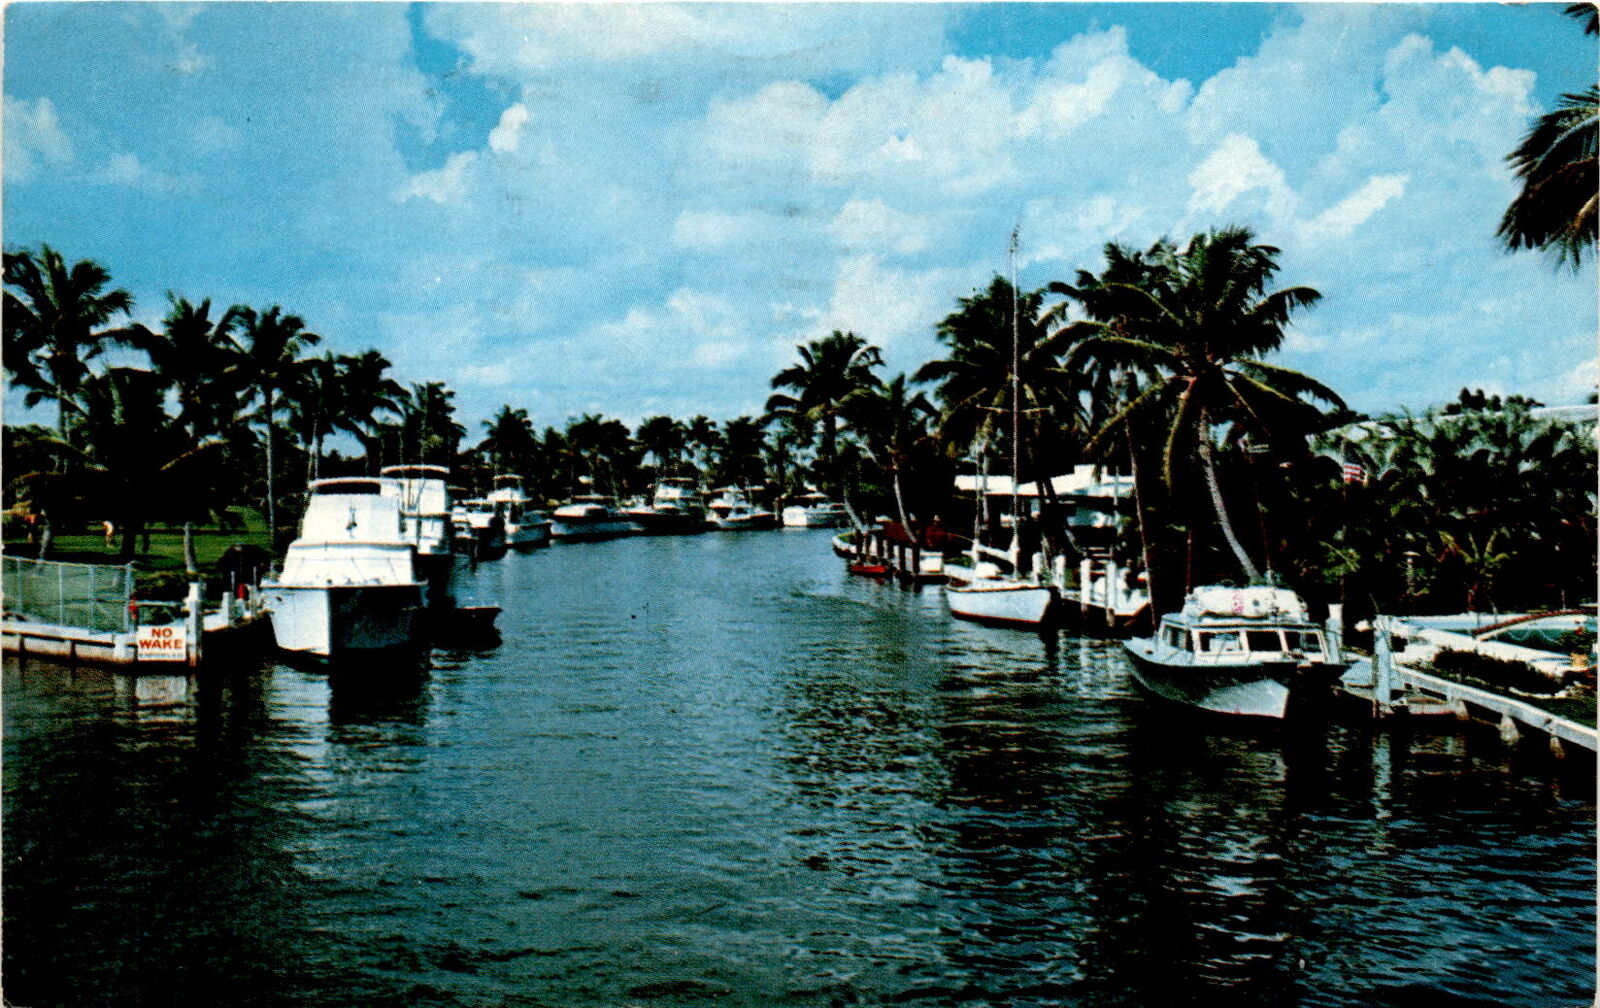 March 3, 1976, Fort Lauderdale, Florida, vacation, perfect weather, Postcard